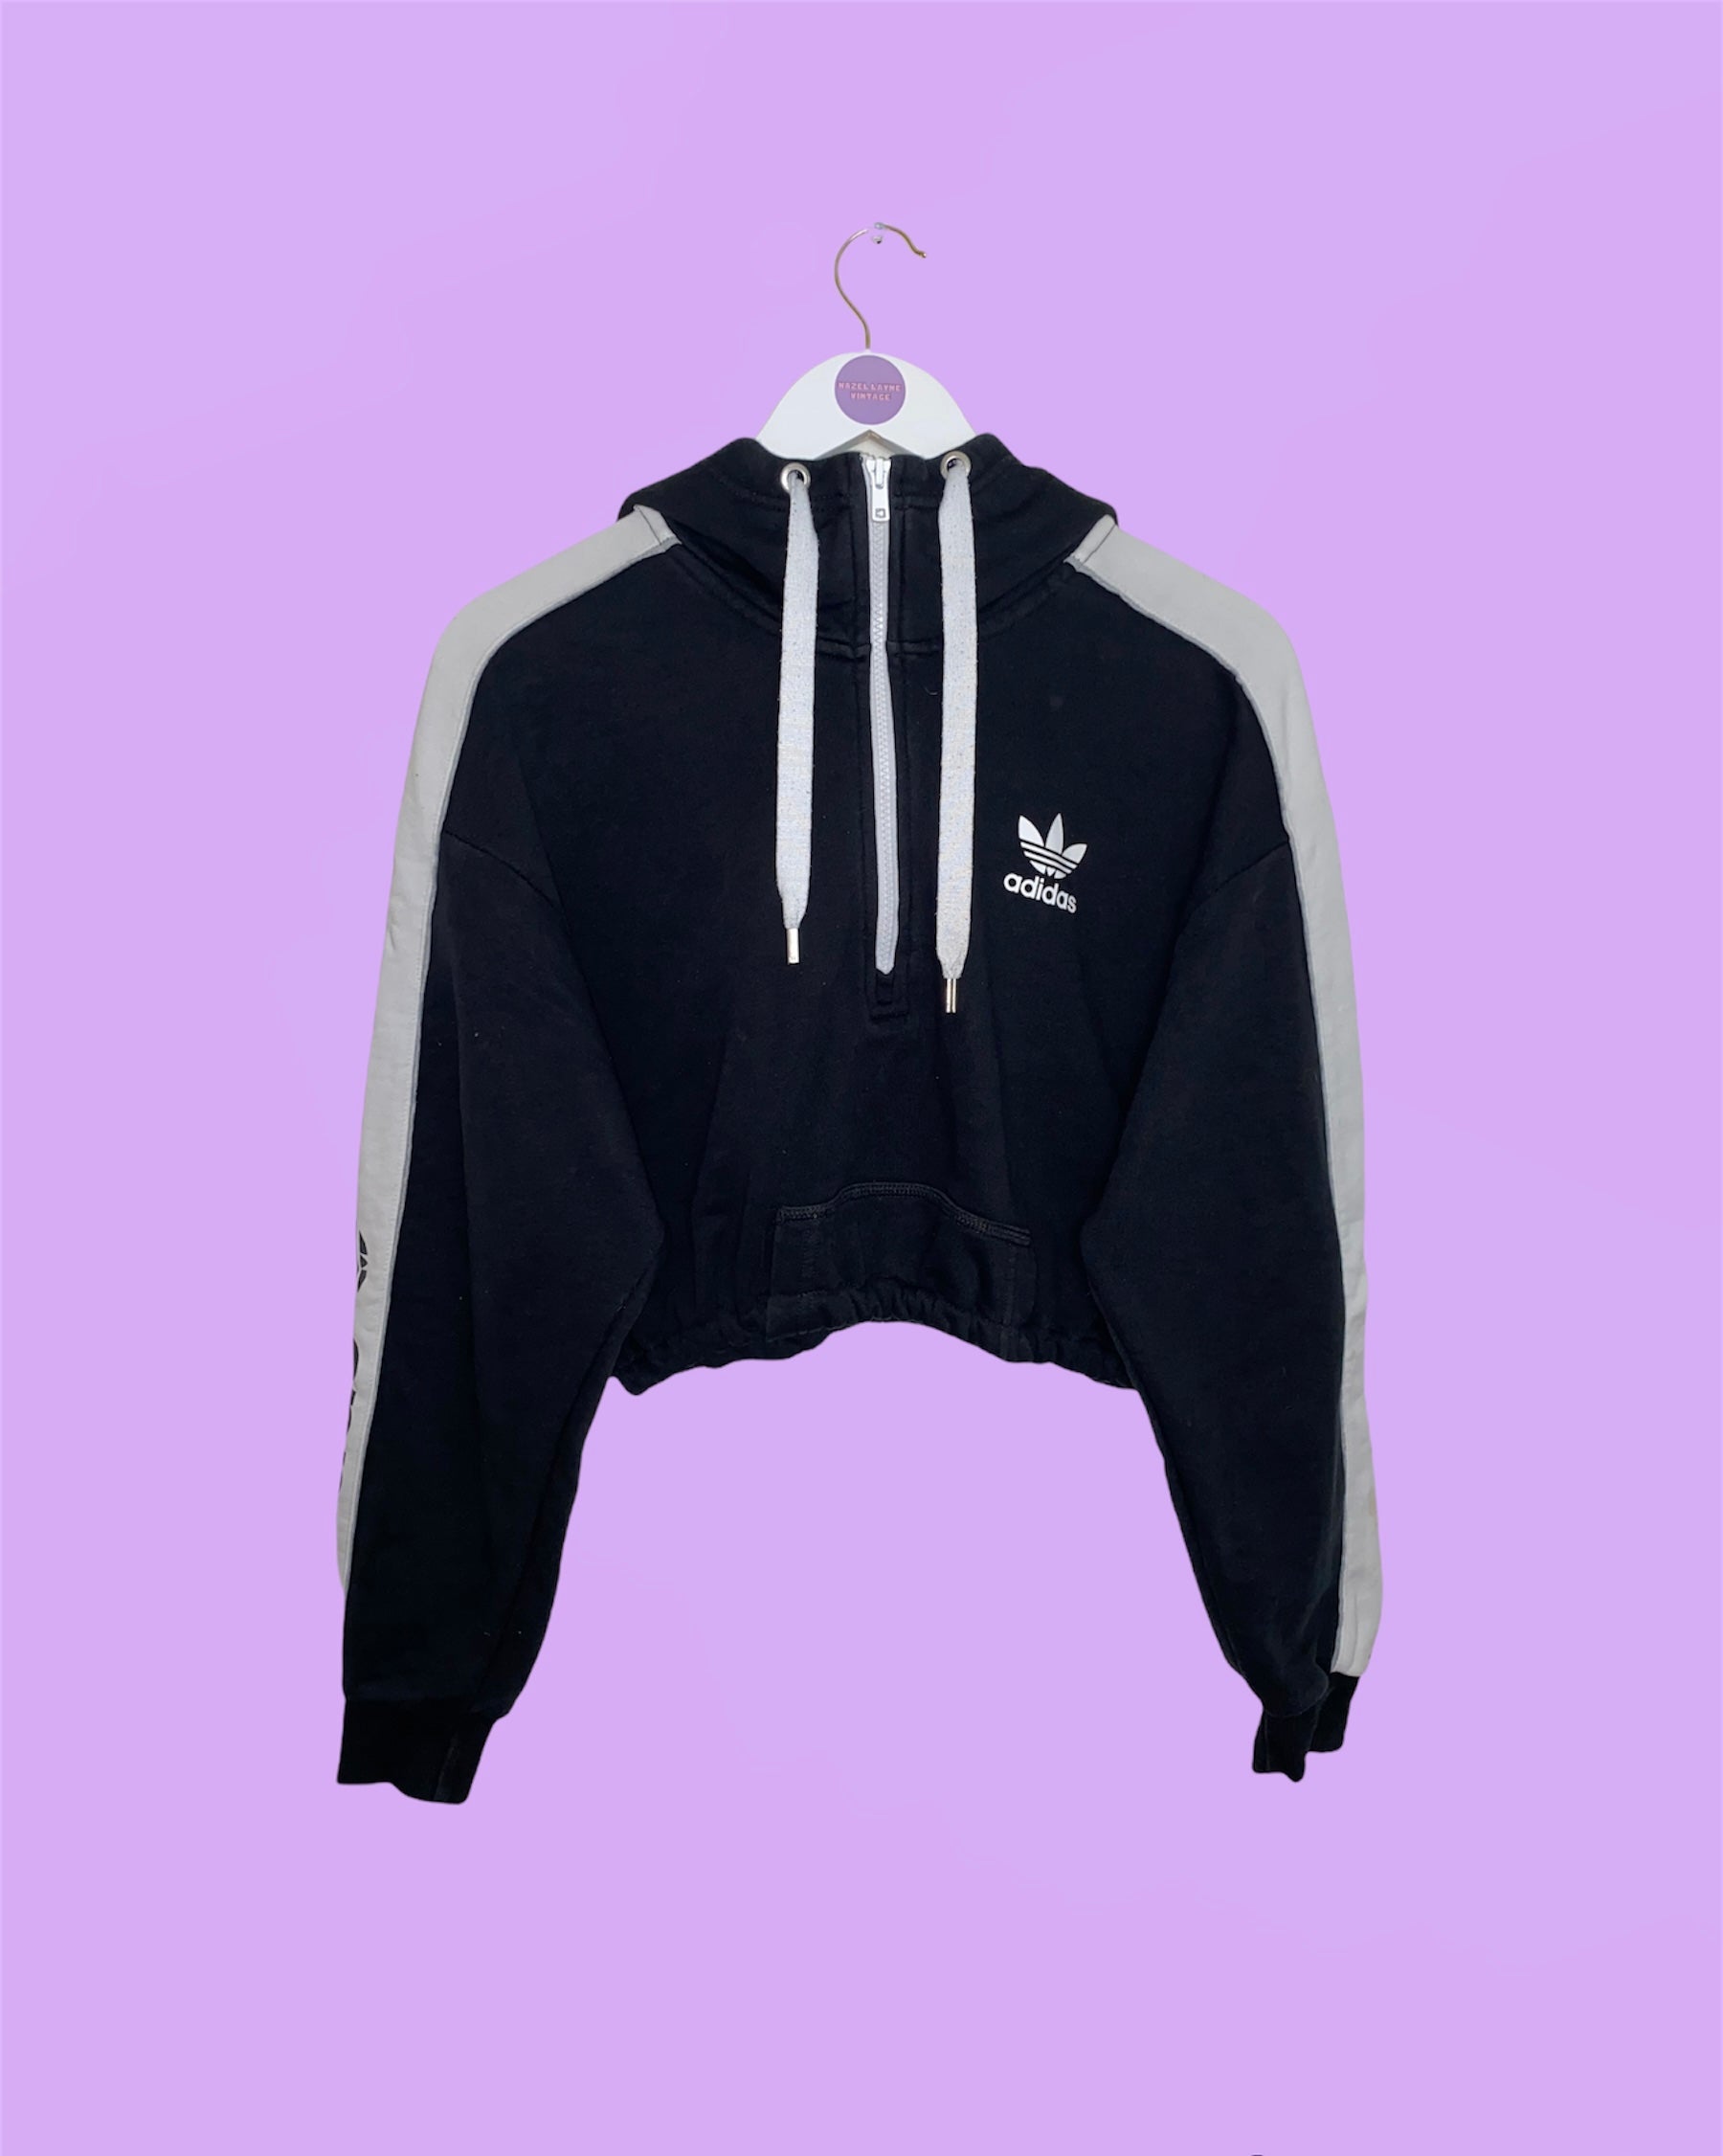 black 1/4 zip cropped hoodie with adidas logo on chest and sleeve shown on a white clothes hanger on a lilac background